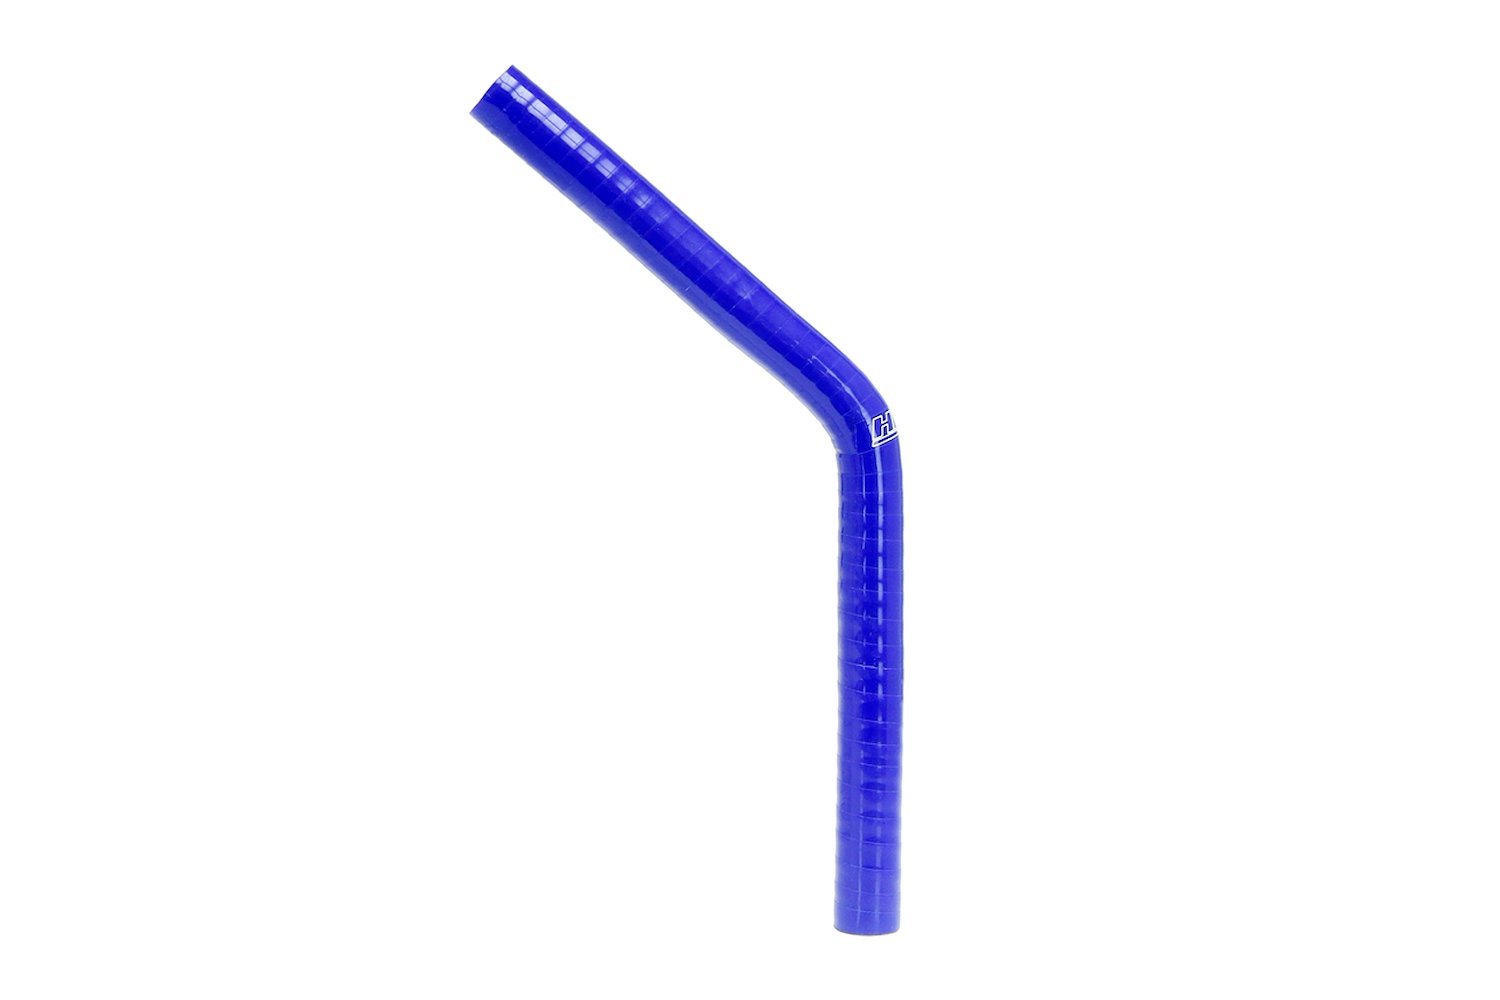 HTSEC45-138-L10-BLUE Silicone 45-Degree Elbow Hose, High-Temp 4-Ply Reinforced, 1-3/8 in. ID, 10 in. Leg, Blue